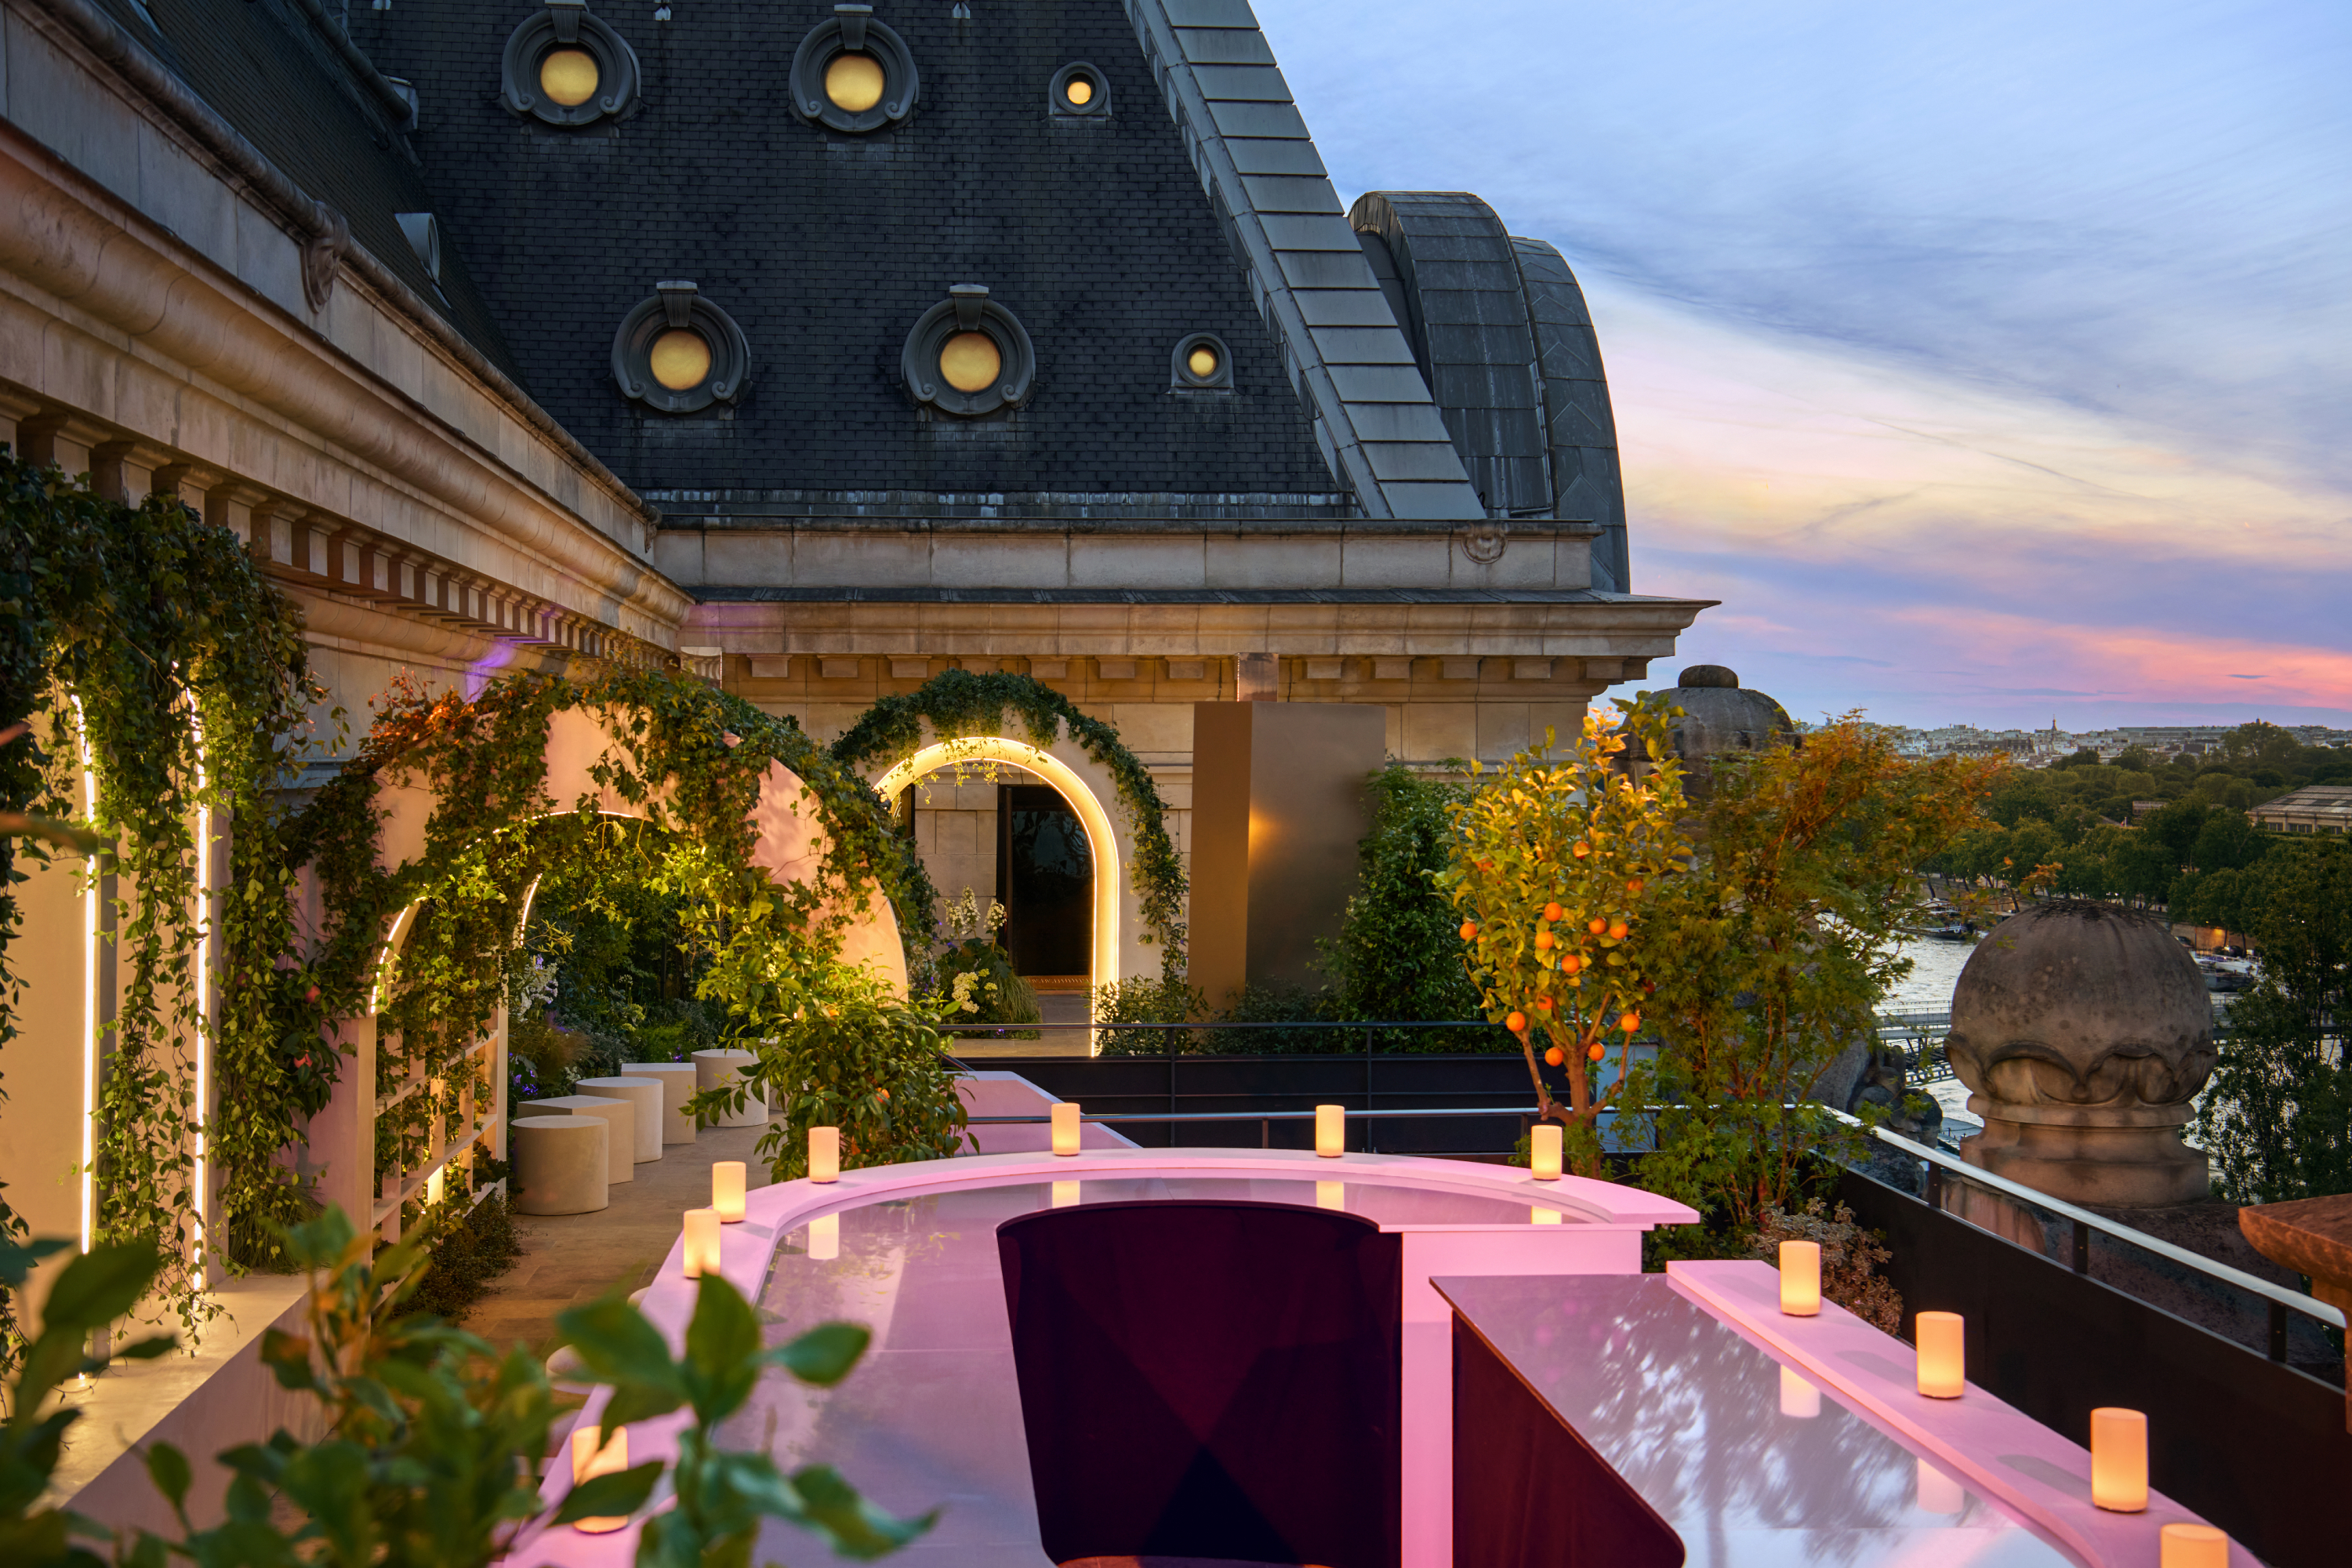 A view of the tasting bar on the terrace, a neo pink donut-shaped structure.